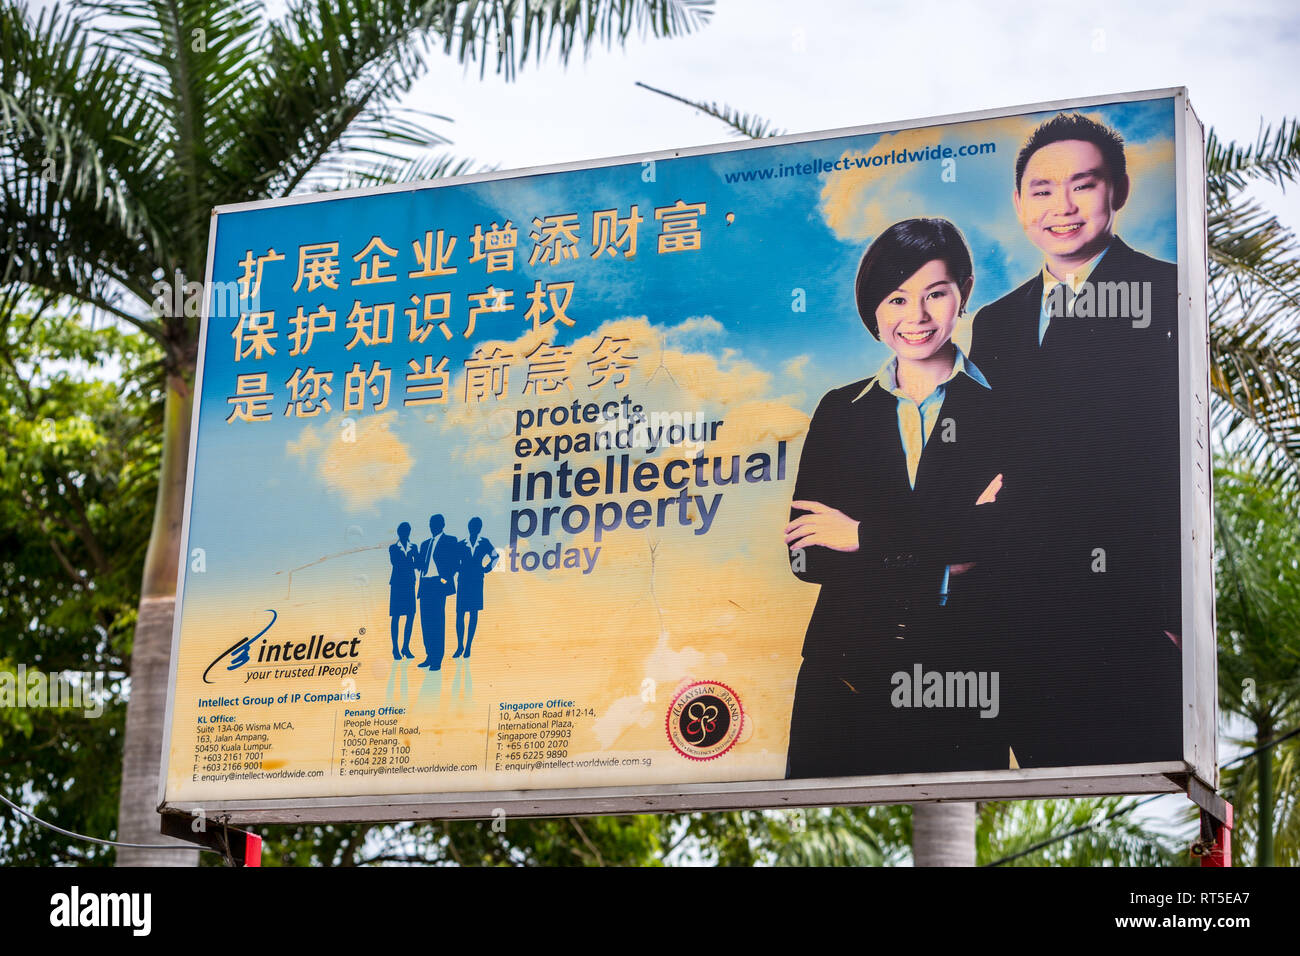 Billboard Advertisement Announcing Intellectual Property Protection Services, George Town, Penang, Malaysia. Stock Photo